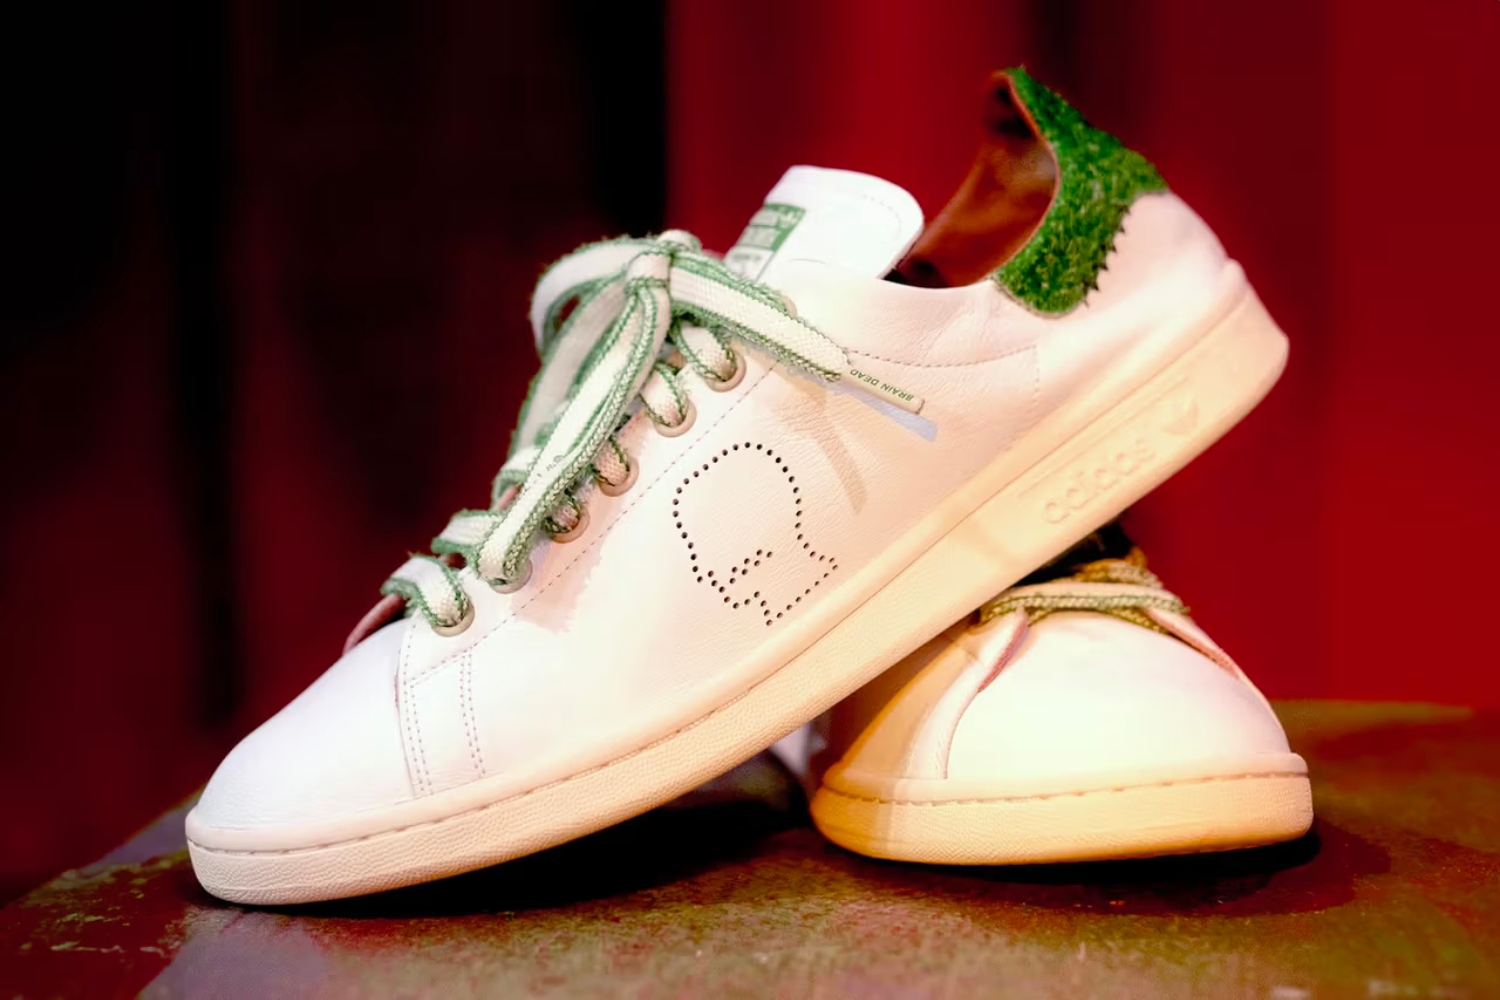 Brain Dead and adidas reunite for the Stan Smith 'Unstructured'